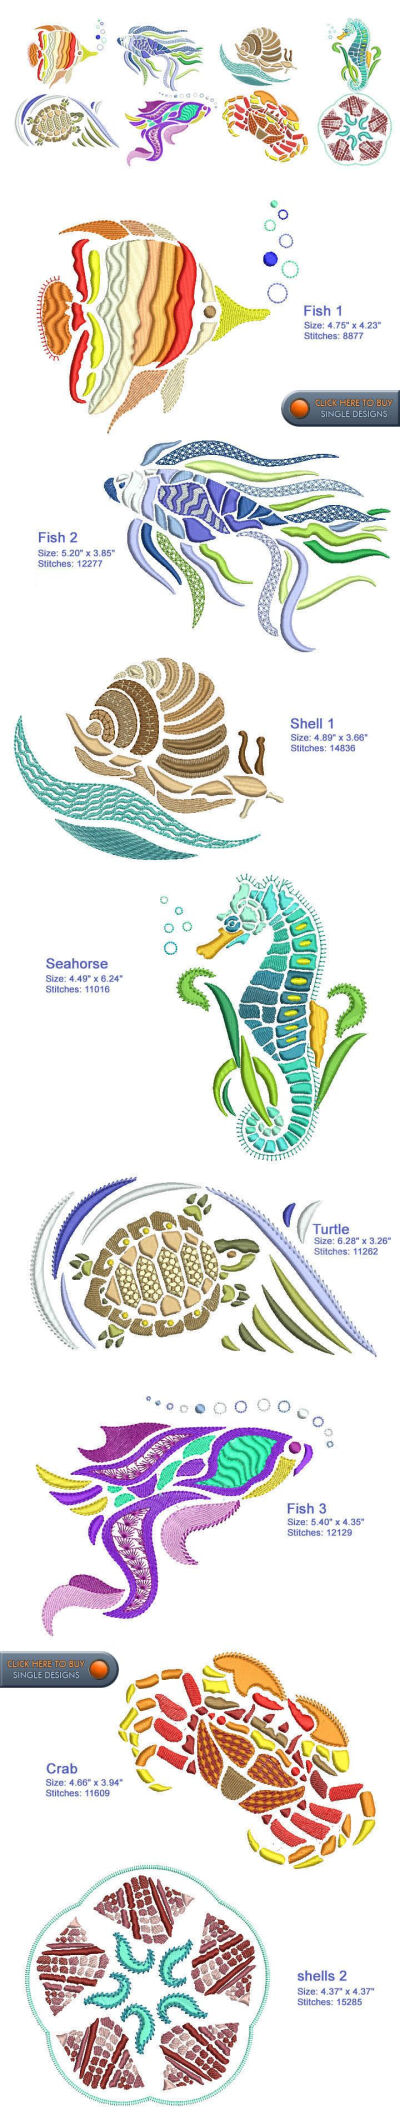 SEA LIFE Embroidery Designs Free Embroidery Design Patterns Applique